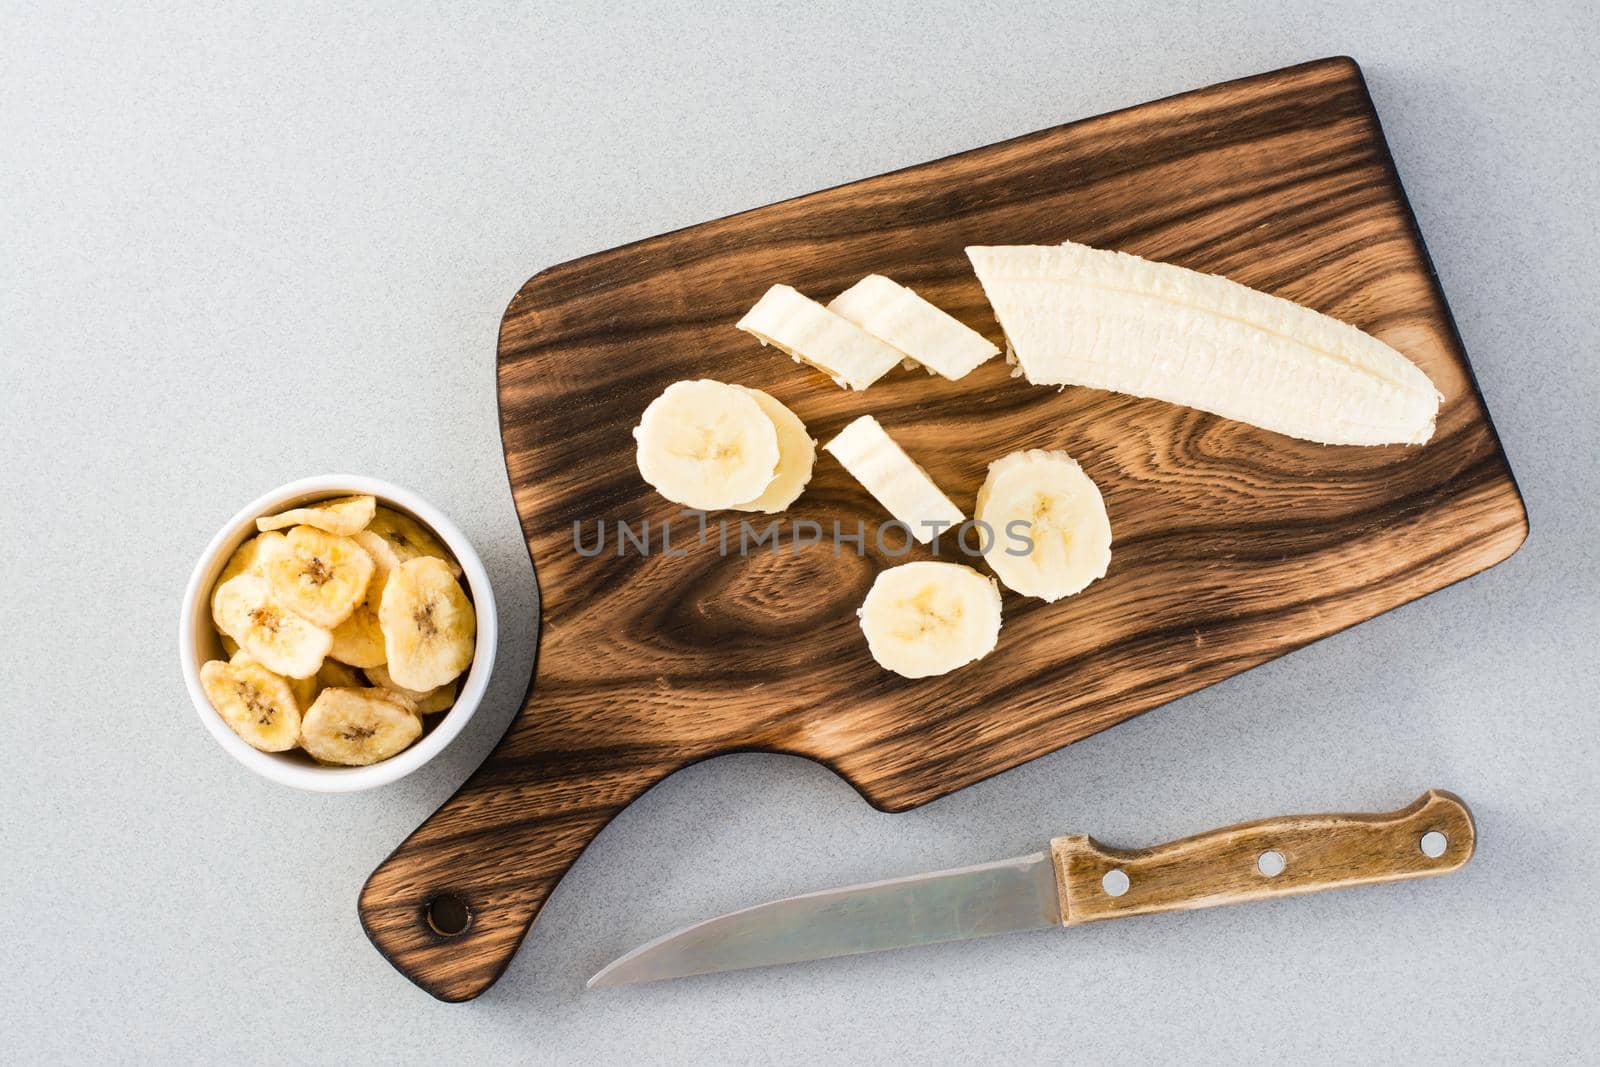 Banana slices on a cutting board and a knife and banana chips in a bowl on the table. Fast food. Top view by Aleruana